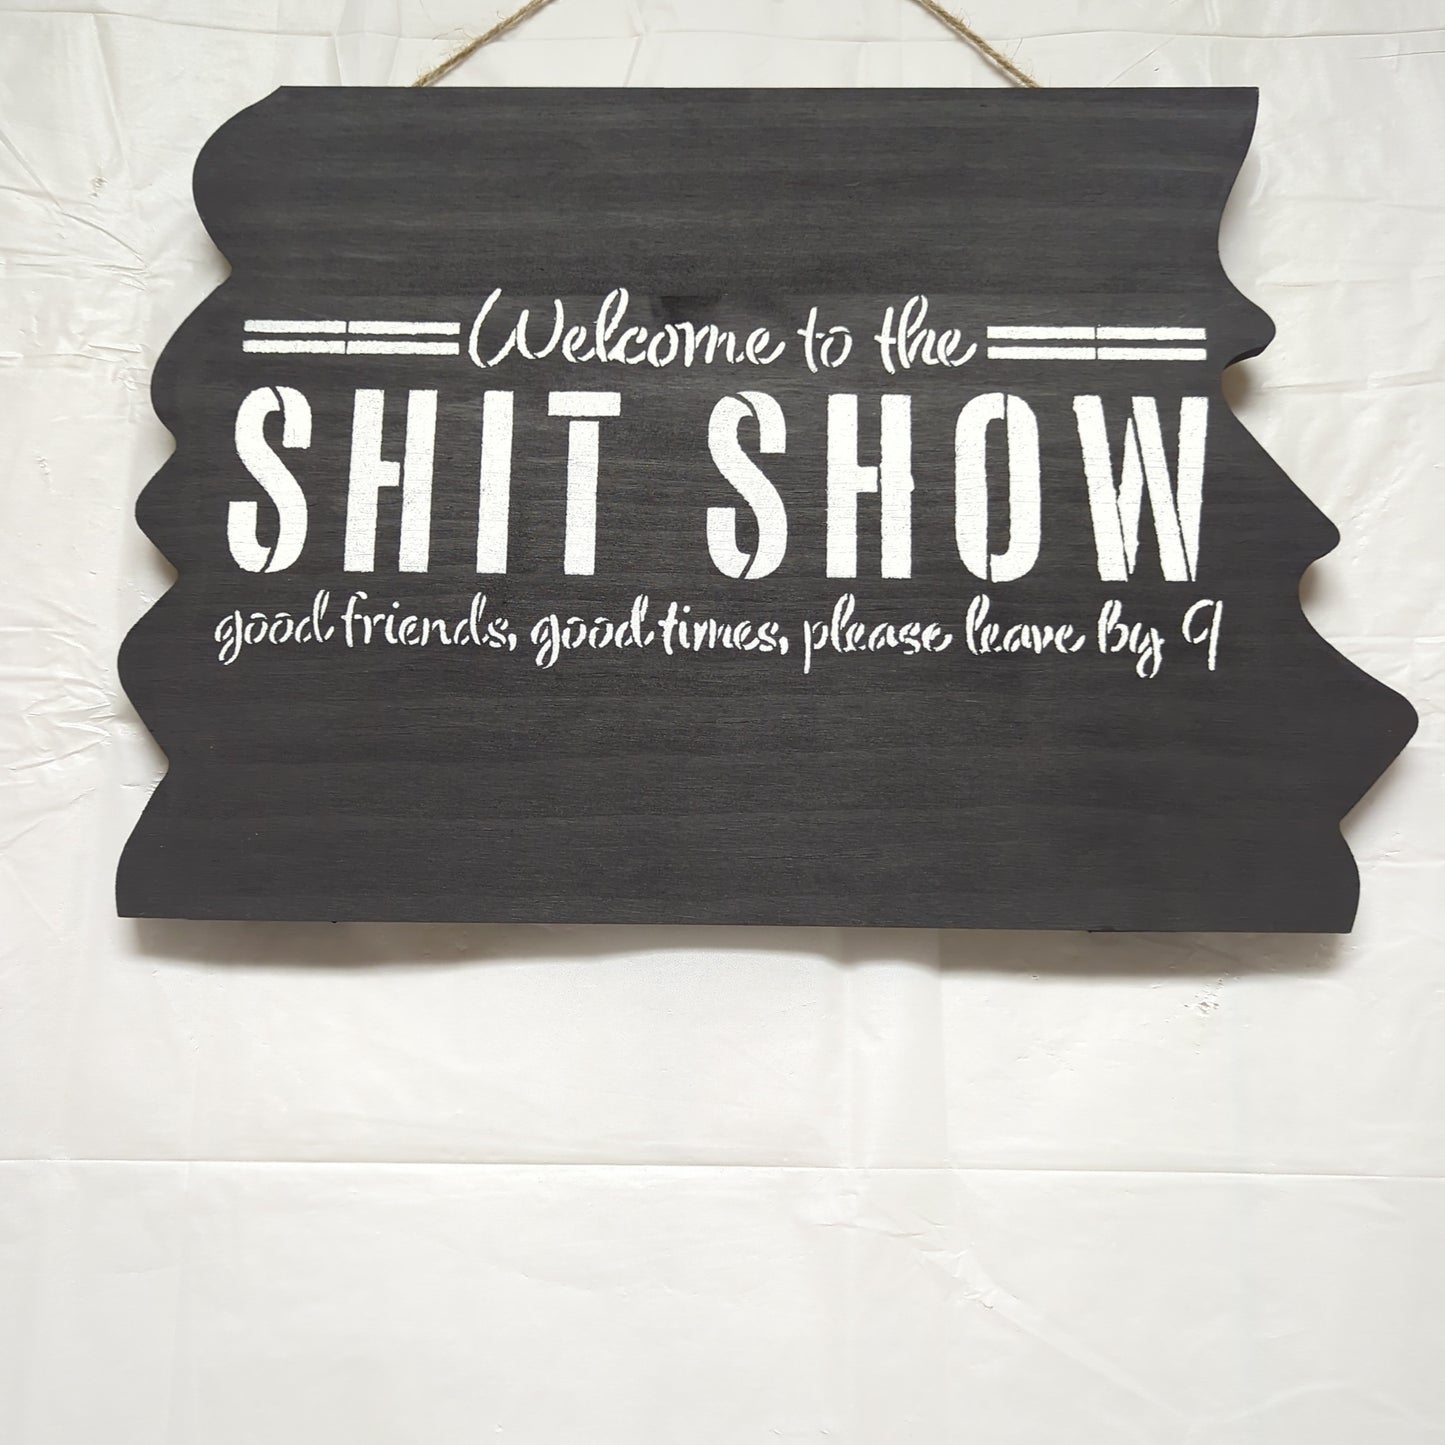 Welcome to the SHIT SHOW good friends, good times, please leave by 9.